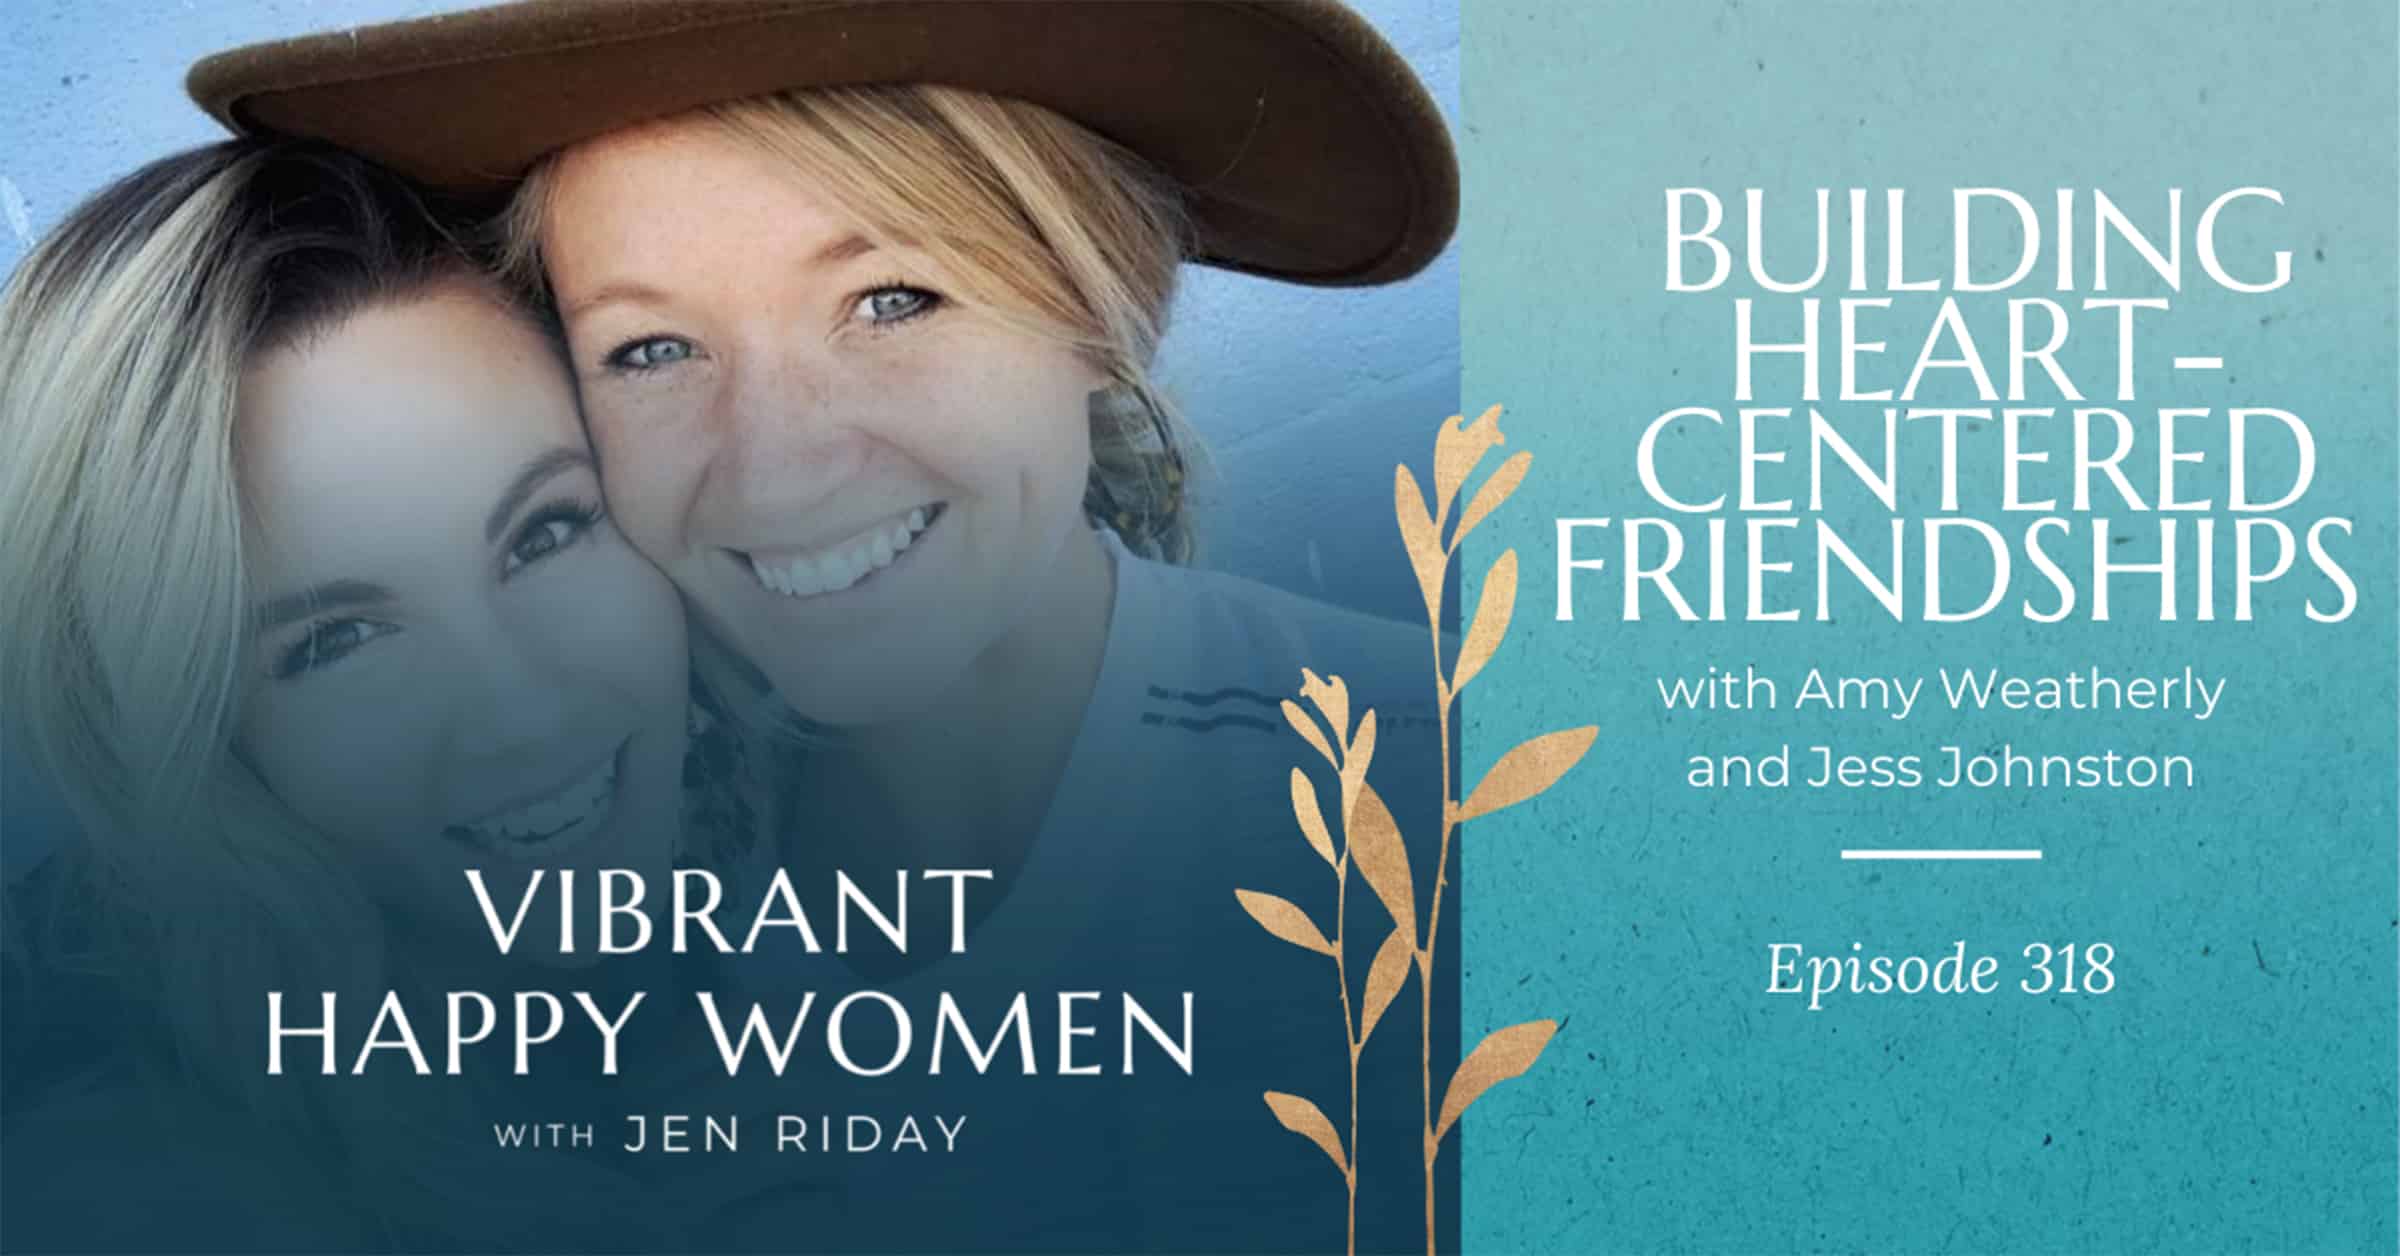 Vibrant Happy Women with Dr. Jen Riday | Building Heart-Centered Friendships (with Amy Weatherly and Jess Johnston)